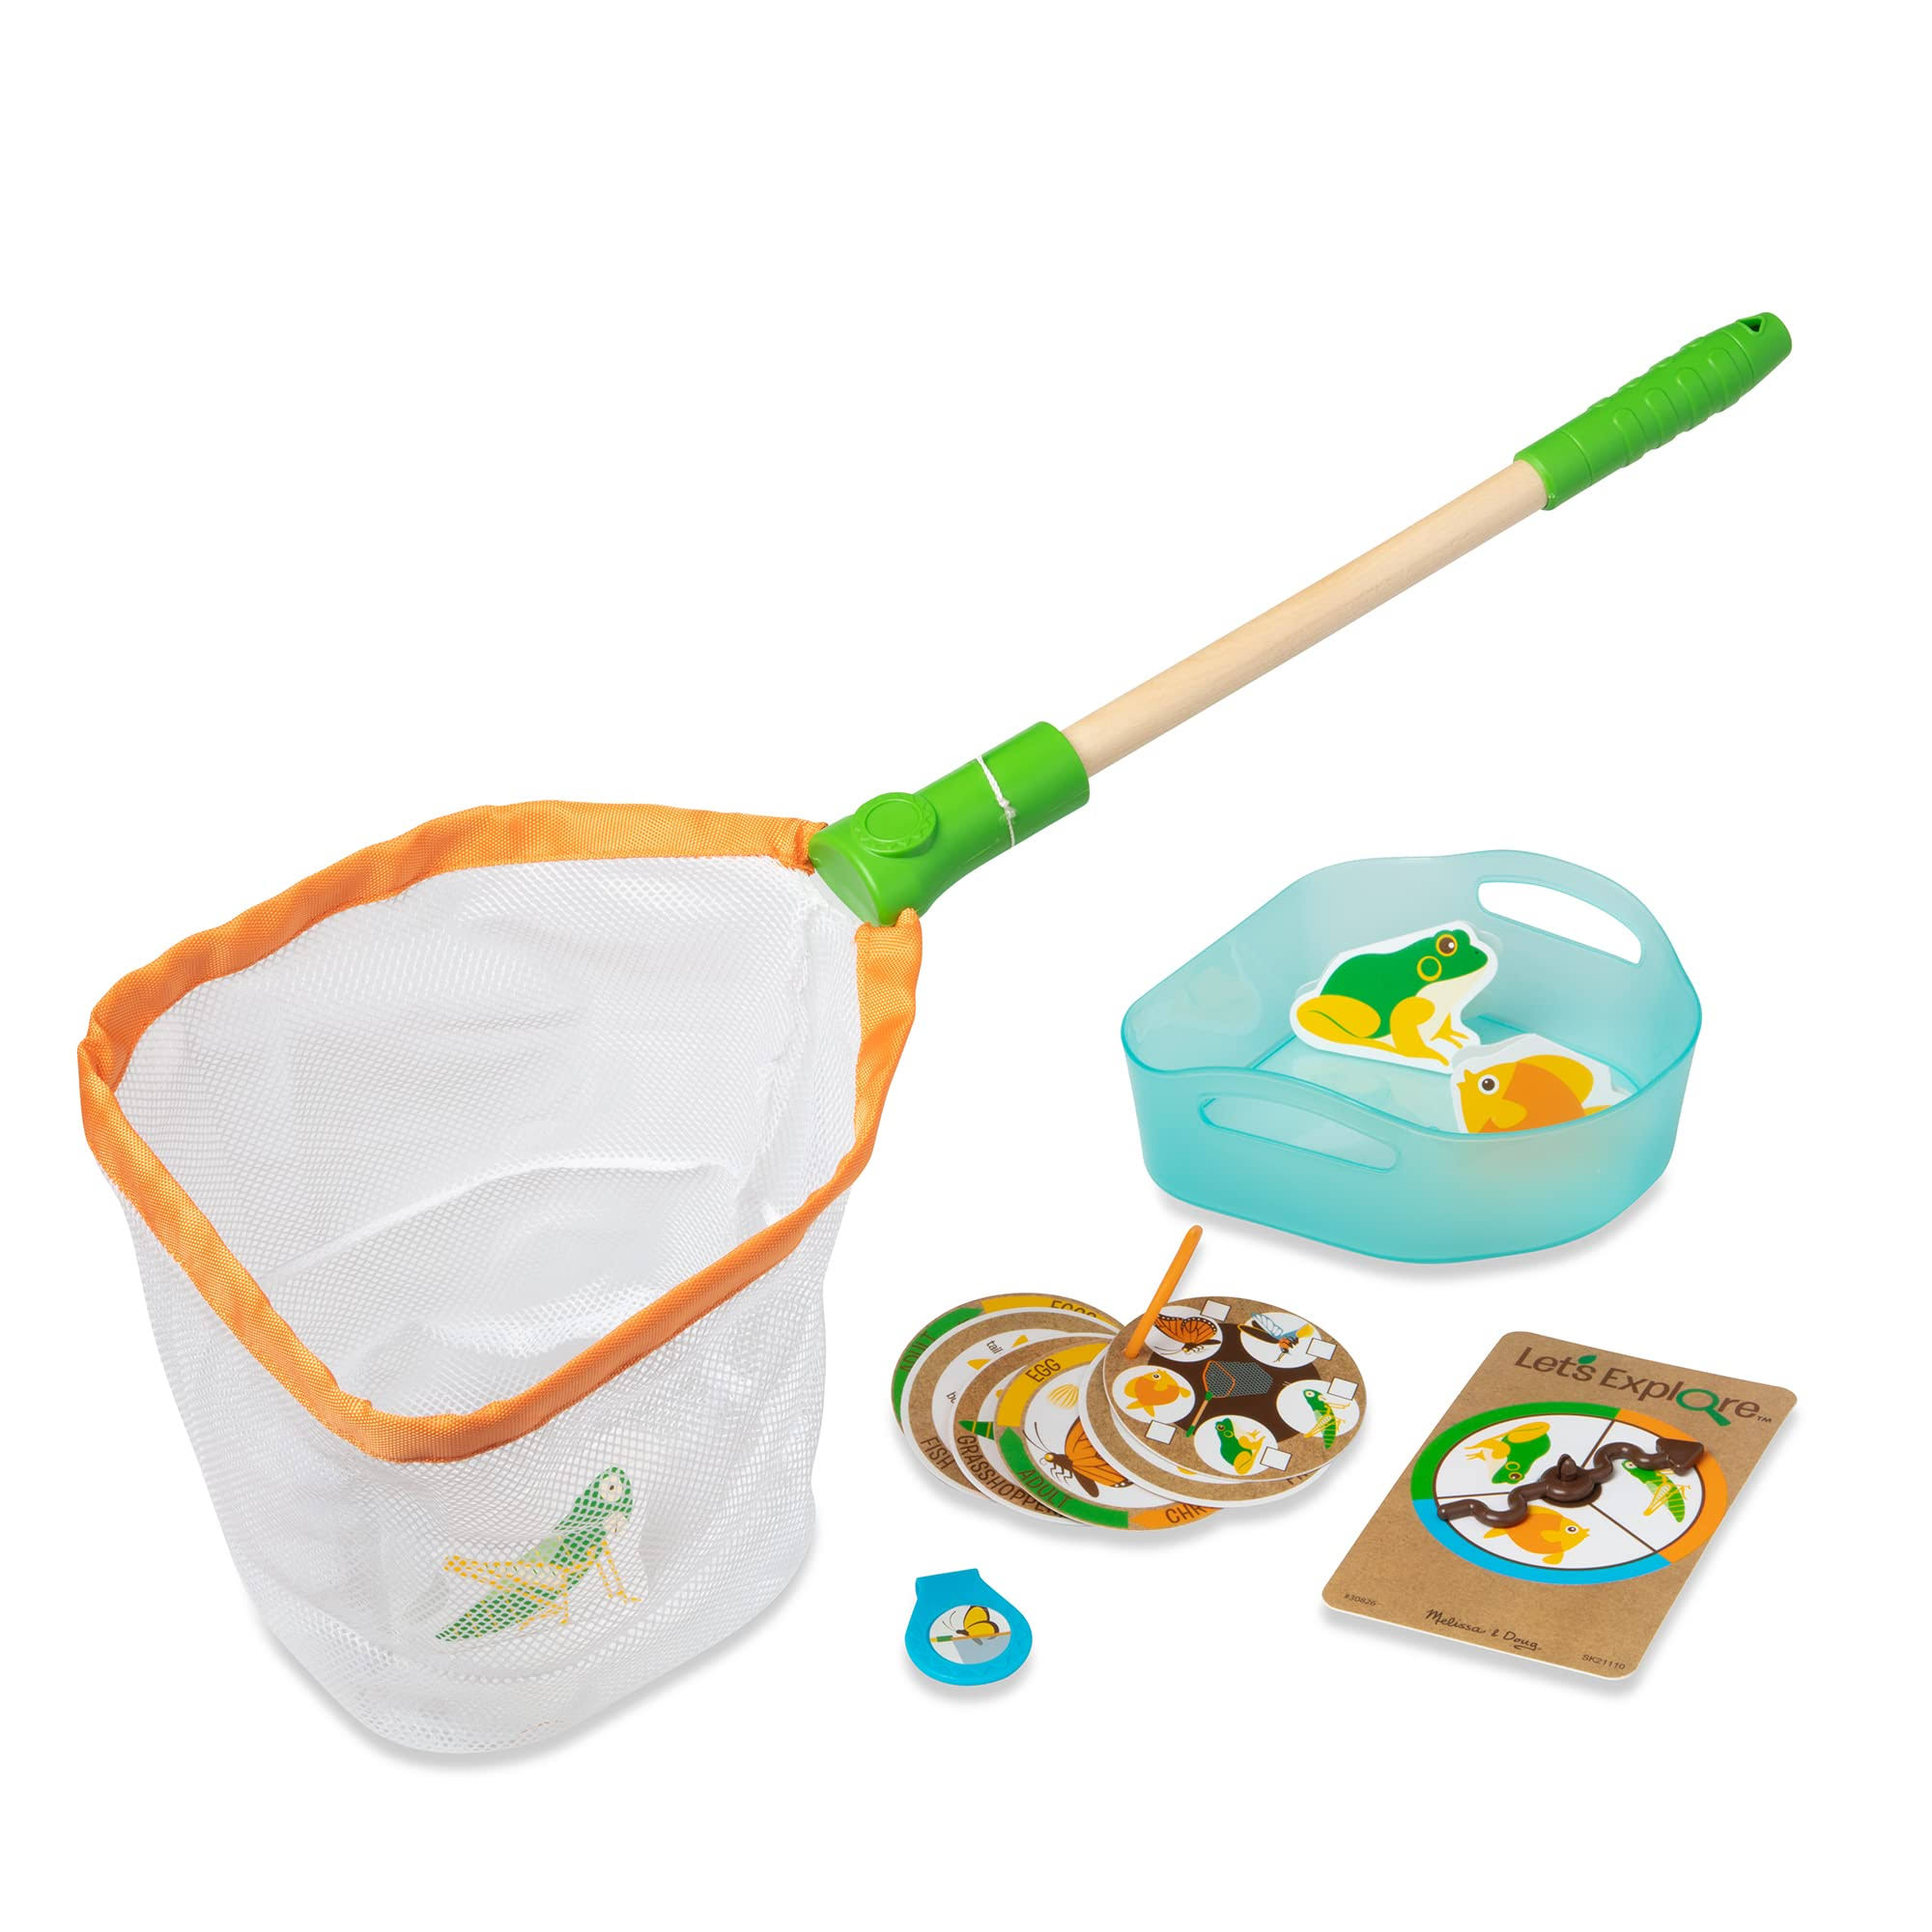 Melissa & Doug Let’s Explore Critter Net Bug and Fish Catching Play Set (14 Pieces)